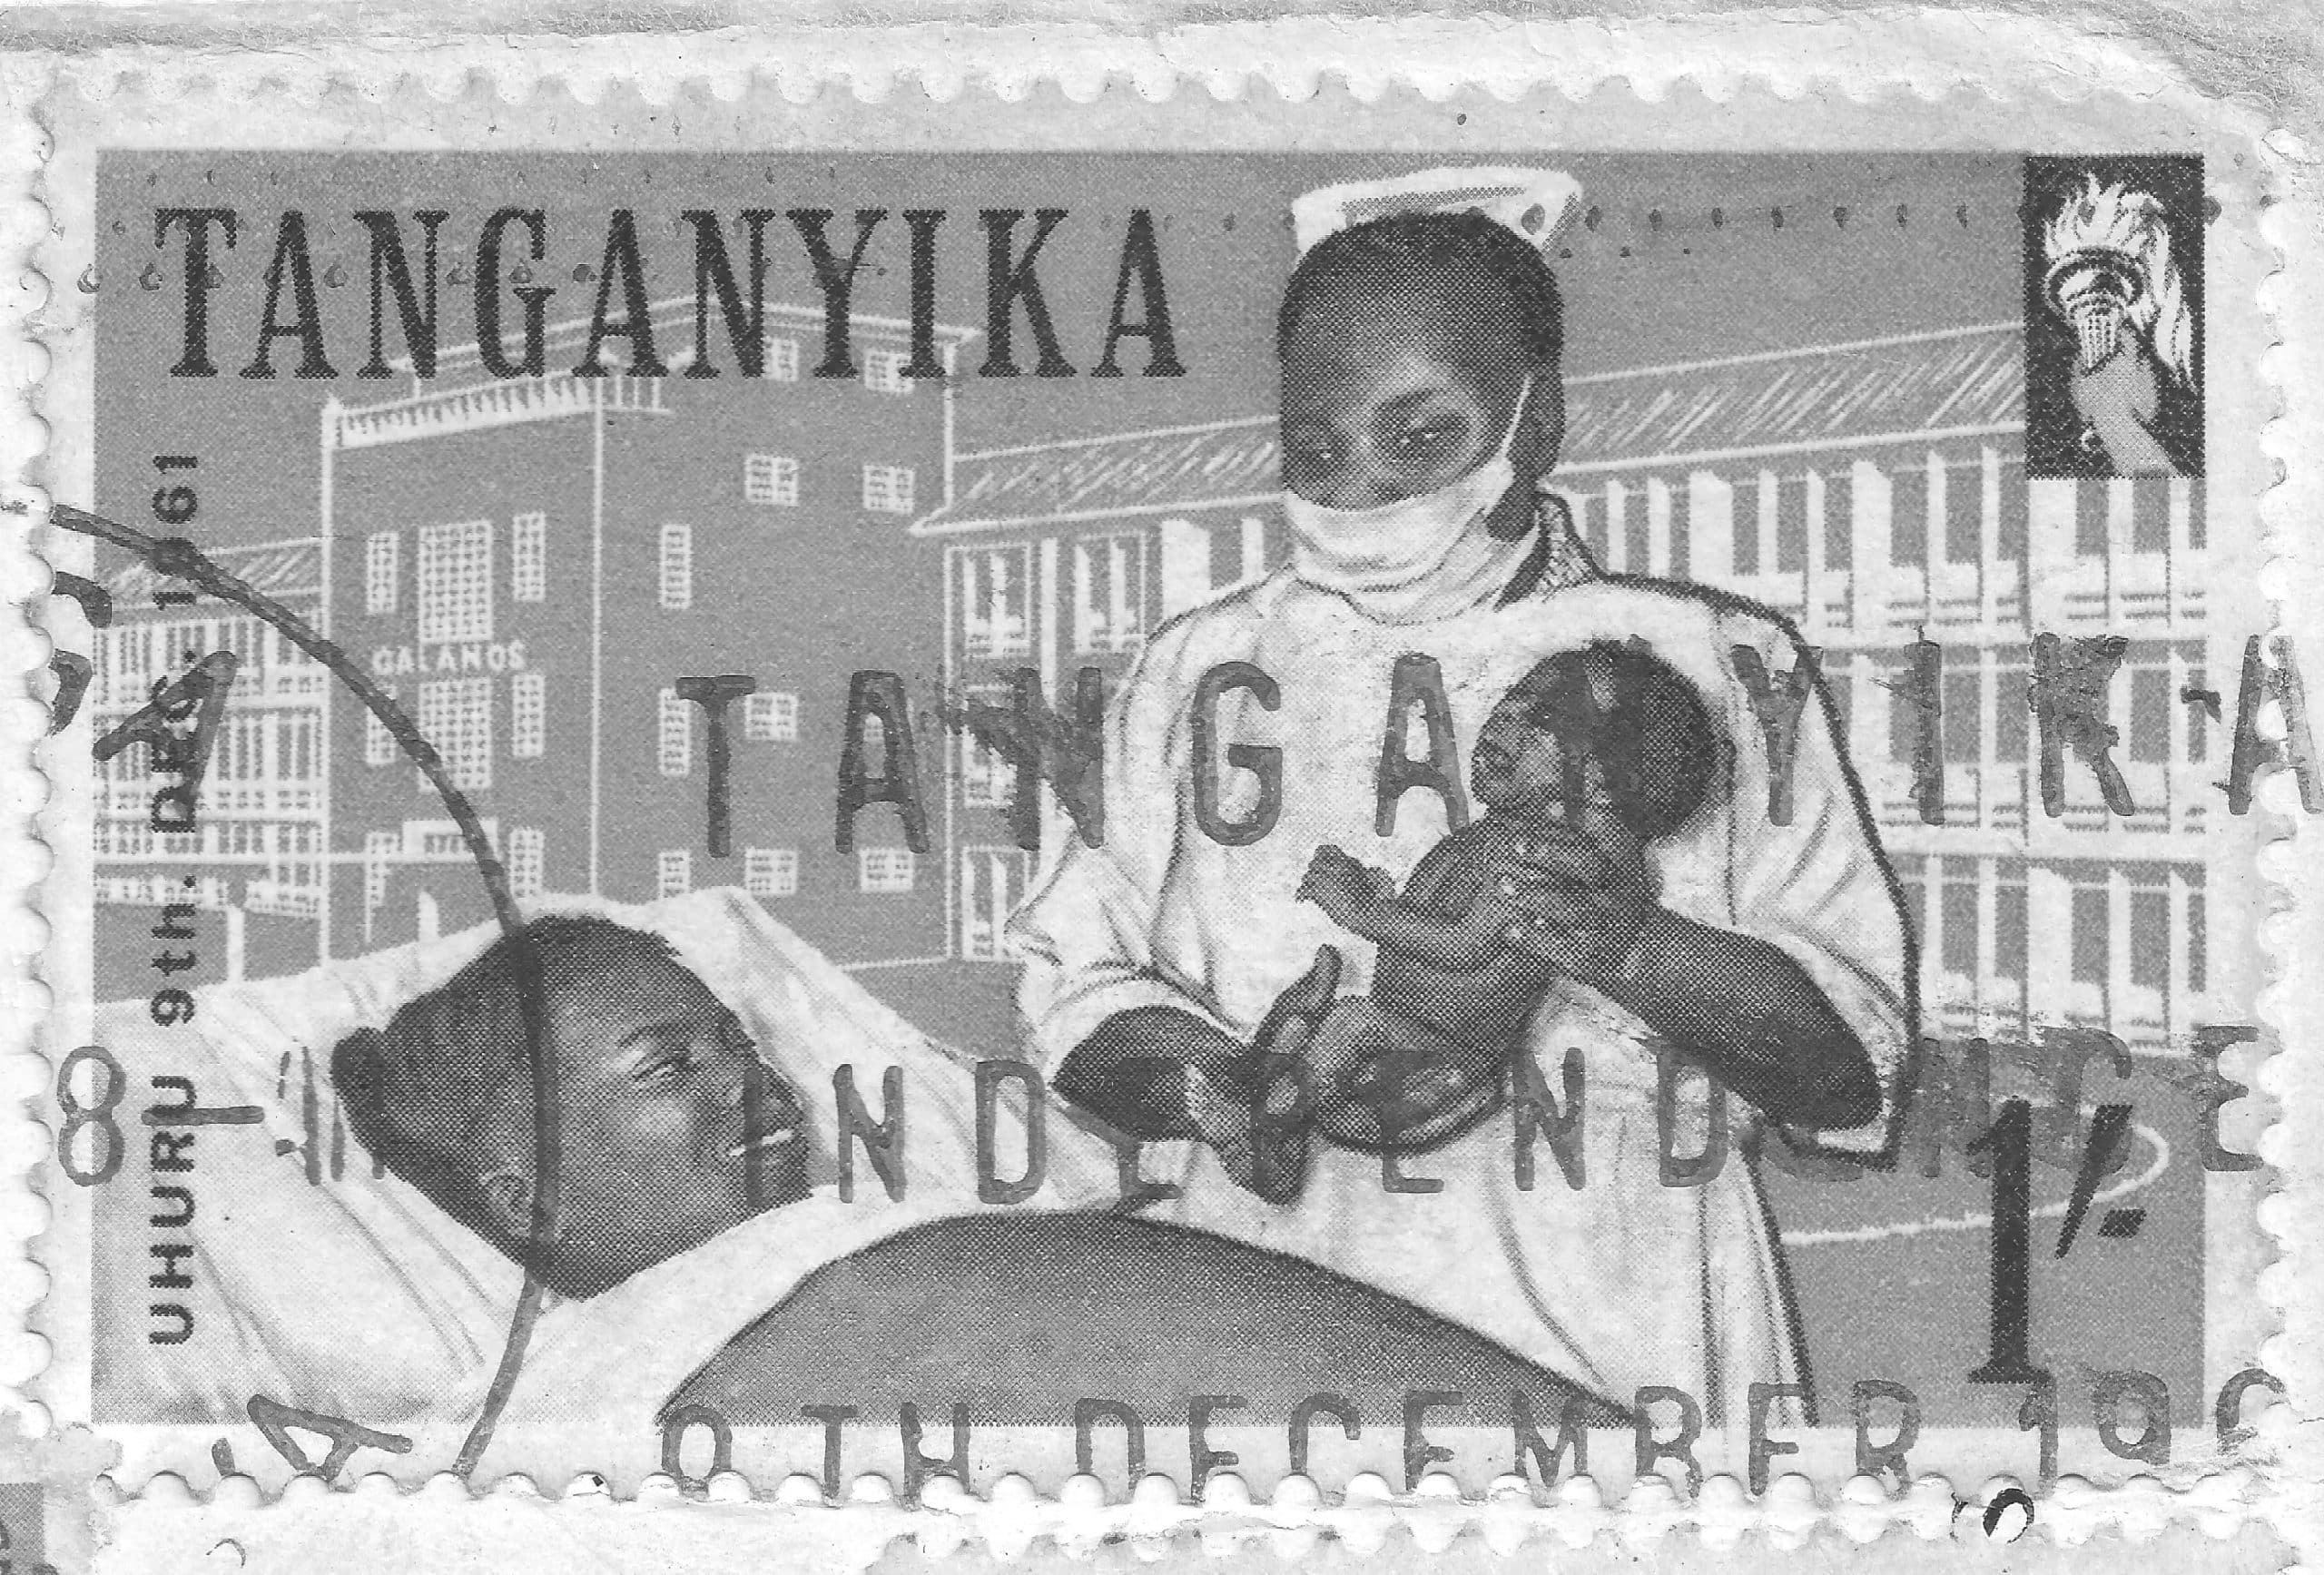 Independence issue, Maternity, 1961 - Tanzania stamp